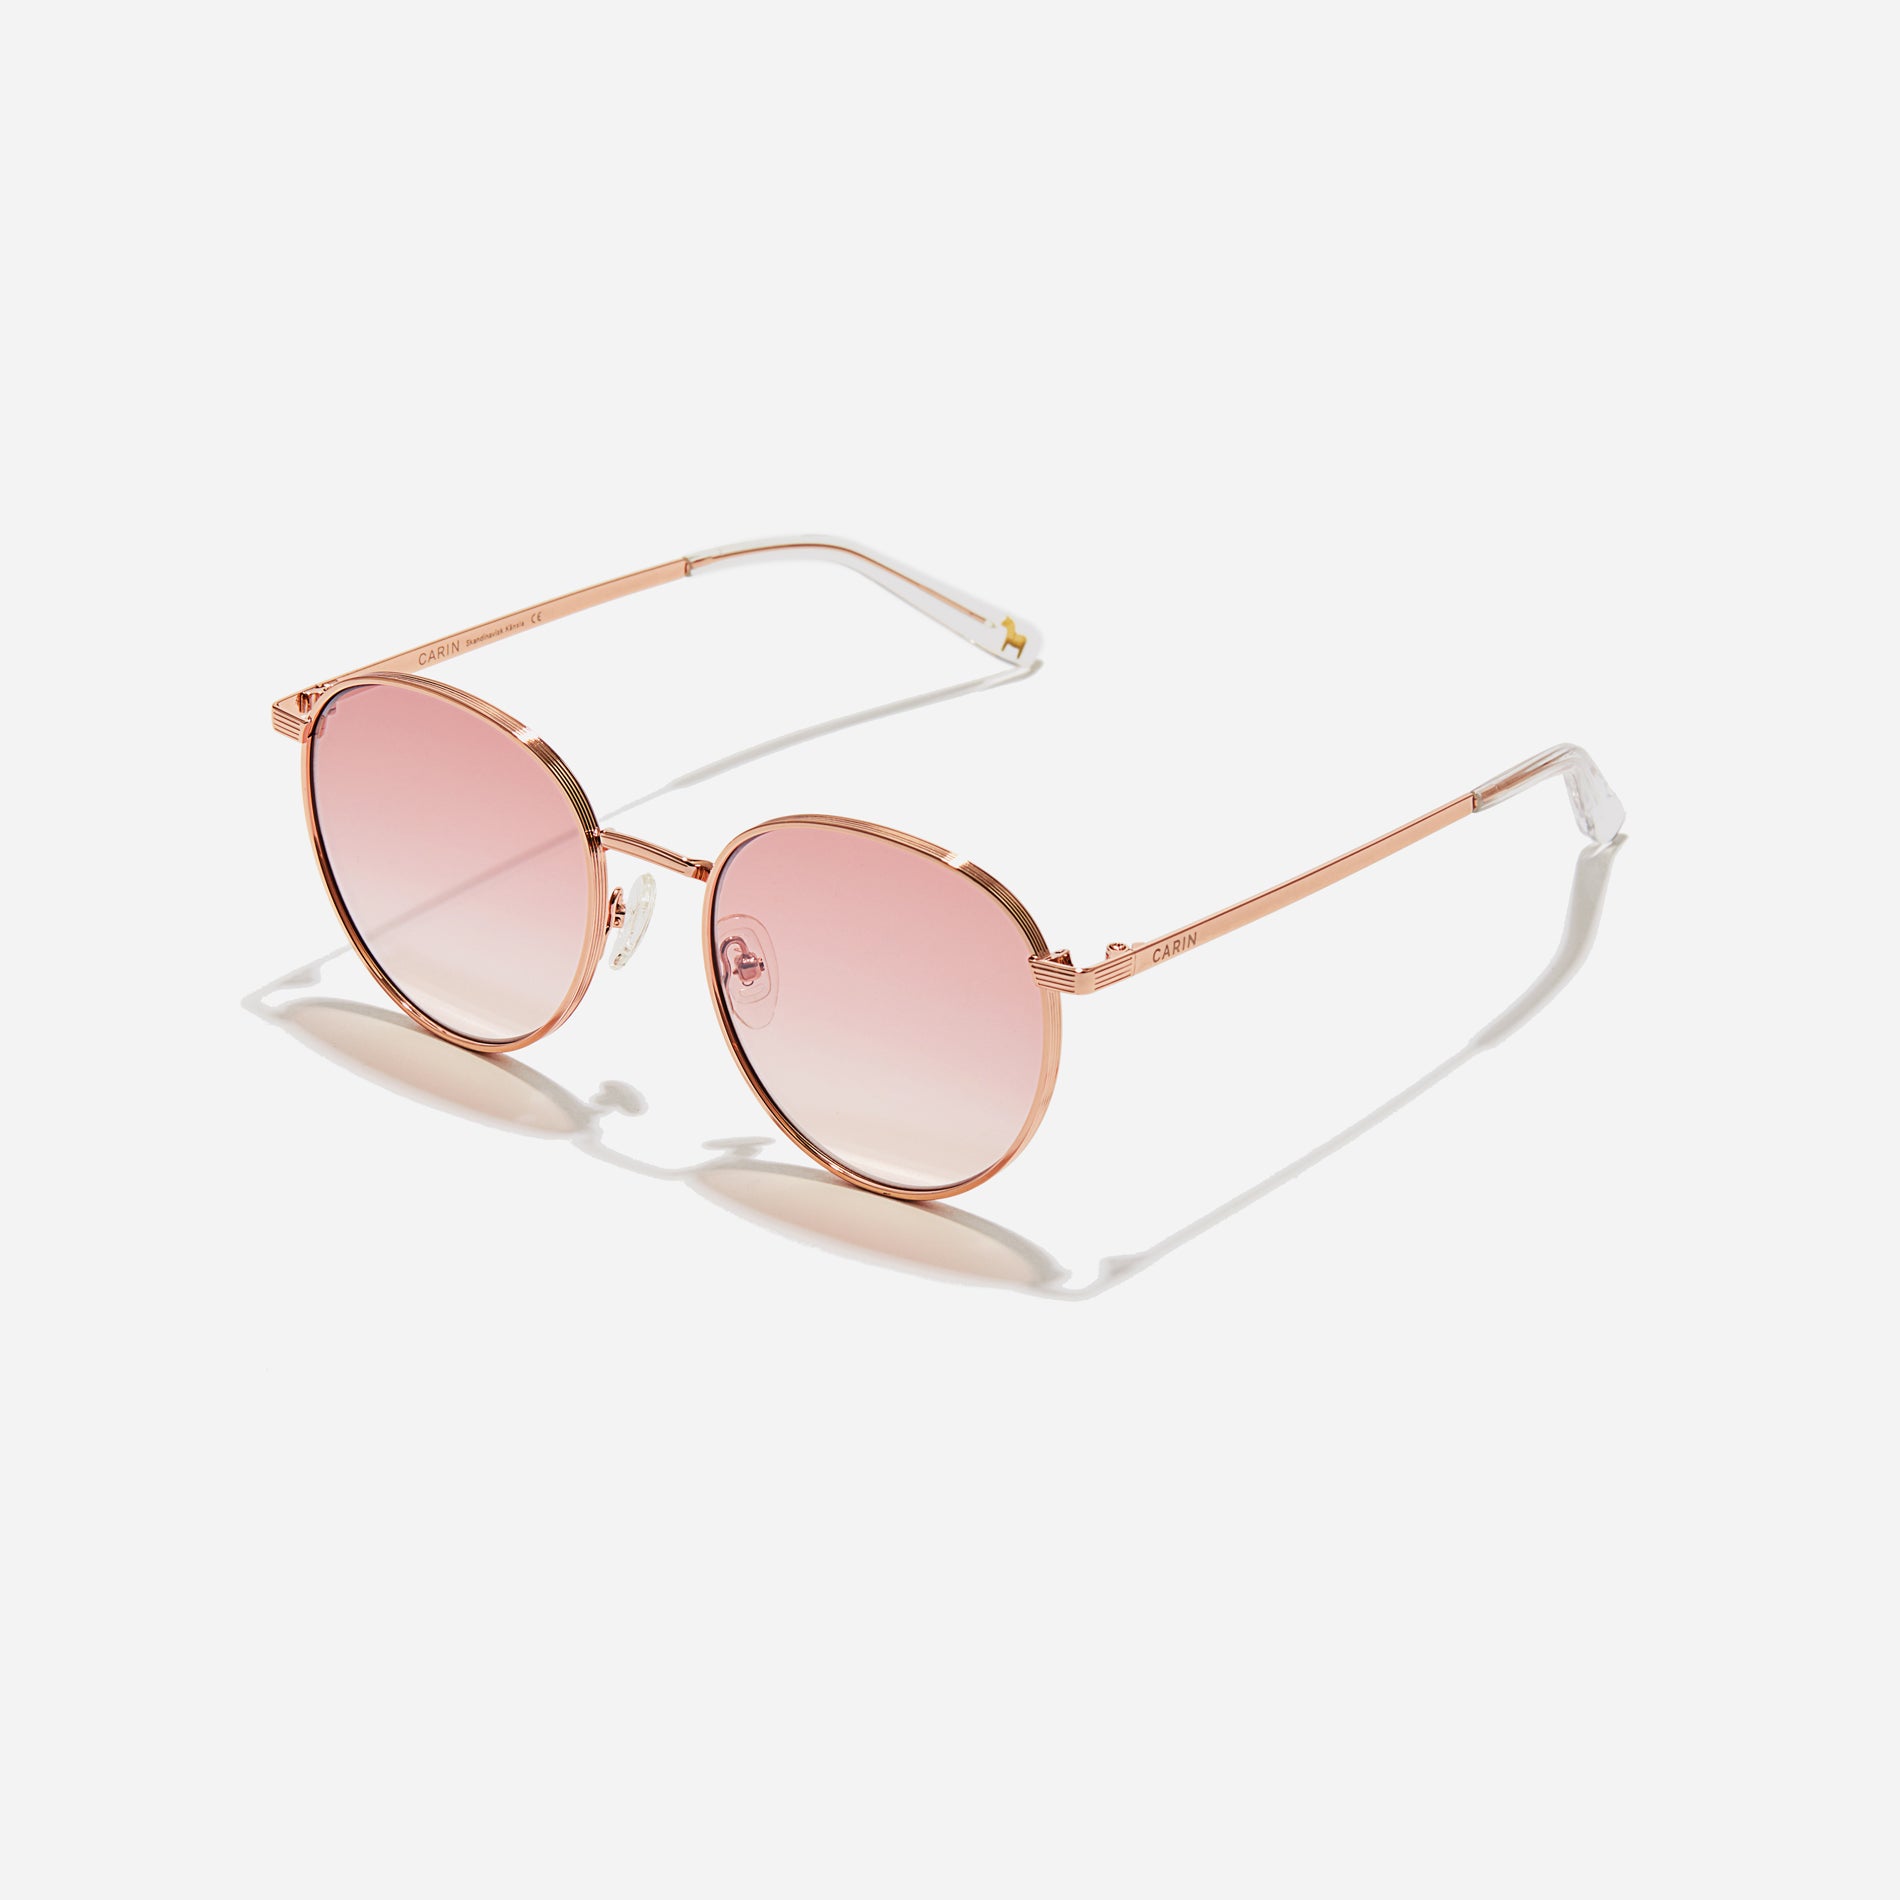  Boeing-style sunglasses featuring chic temple details and half-mirrored lens coating that reduces glare and provides 100% UV protection.